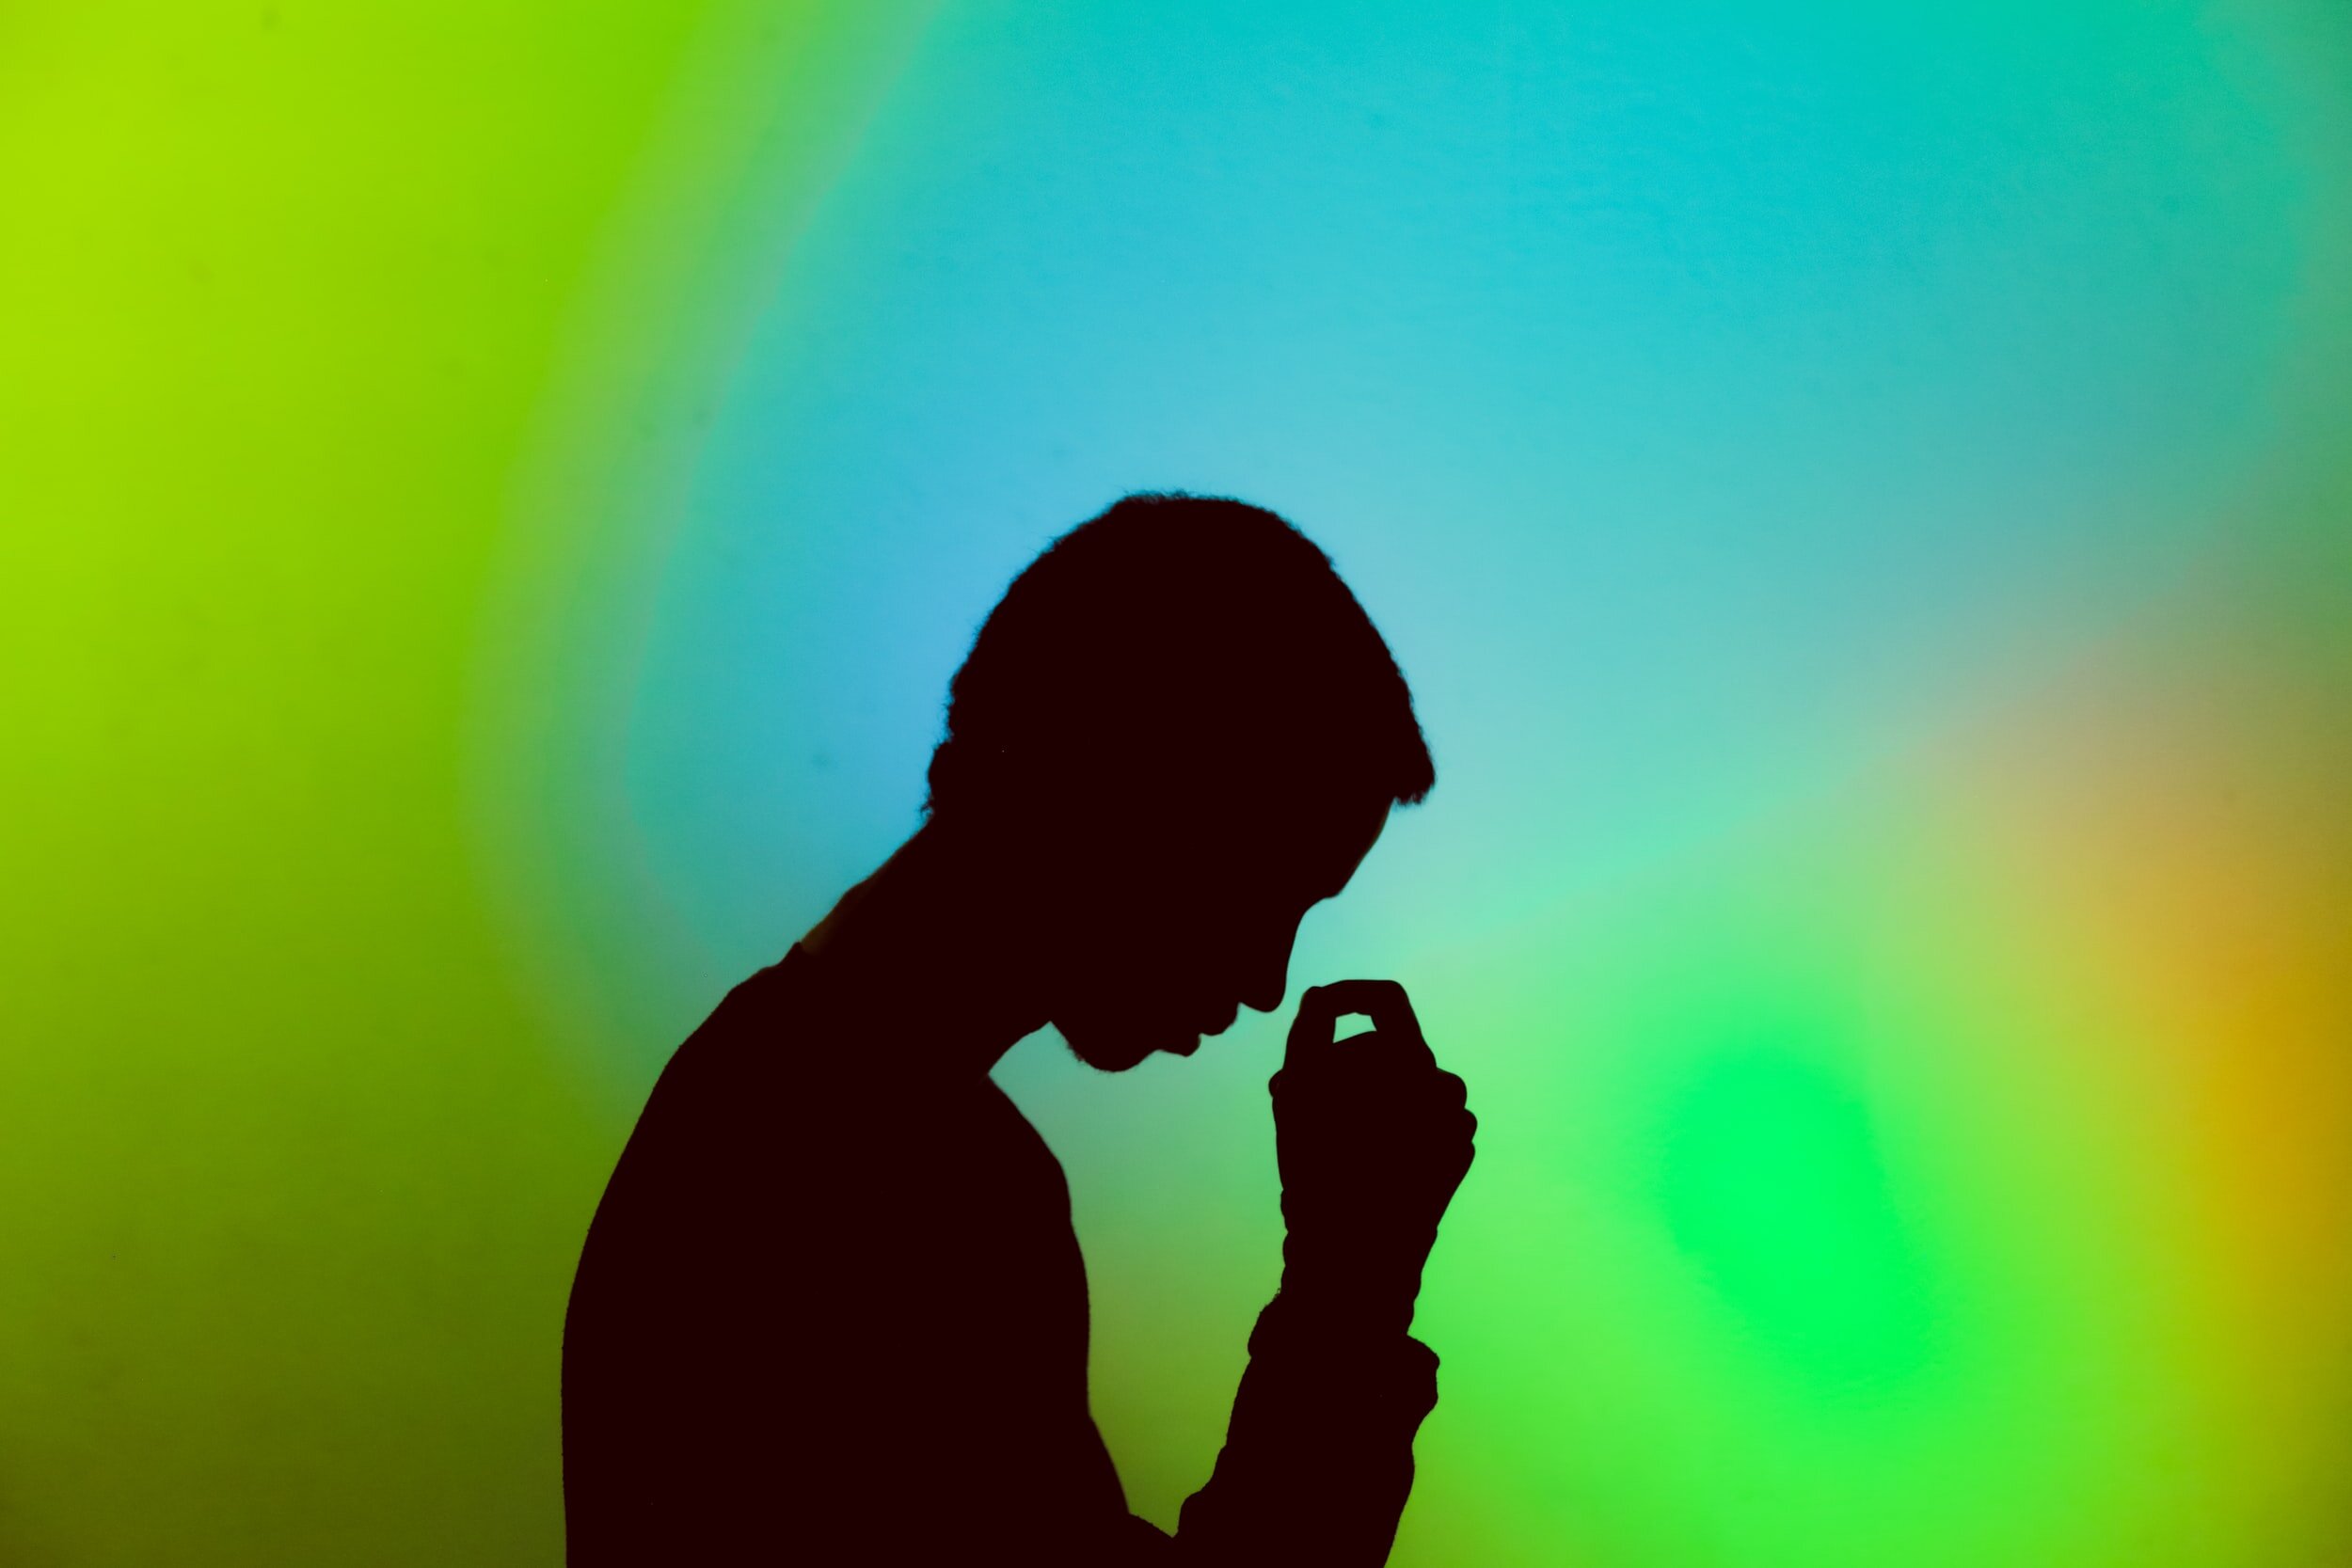 Person in contemplation against a soft gradient background, evoking a sense of introspection and calm for stress management.